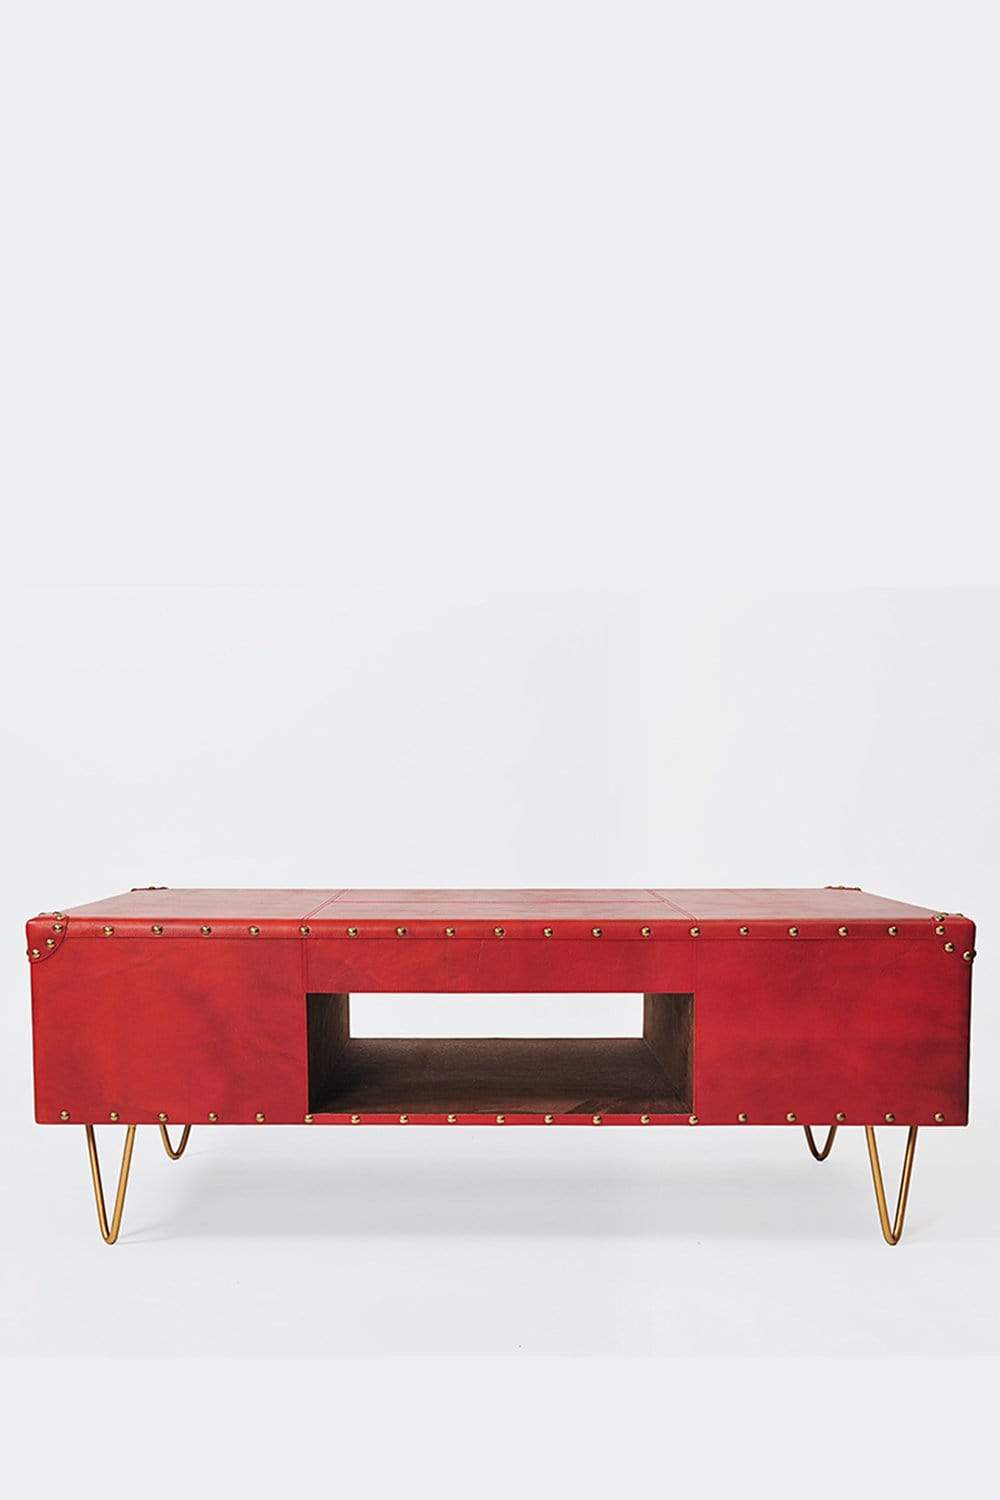 ROSE COFFEE TABLE IN LEATHER WITH METAL LEGS - ART AVENUE